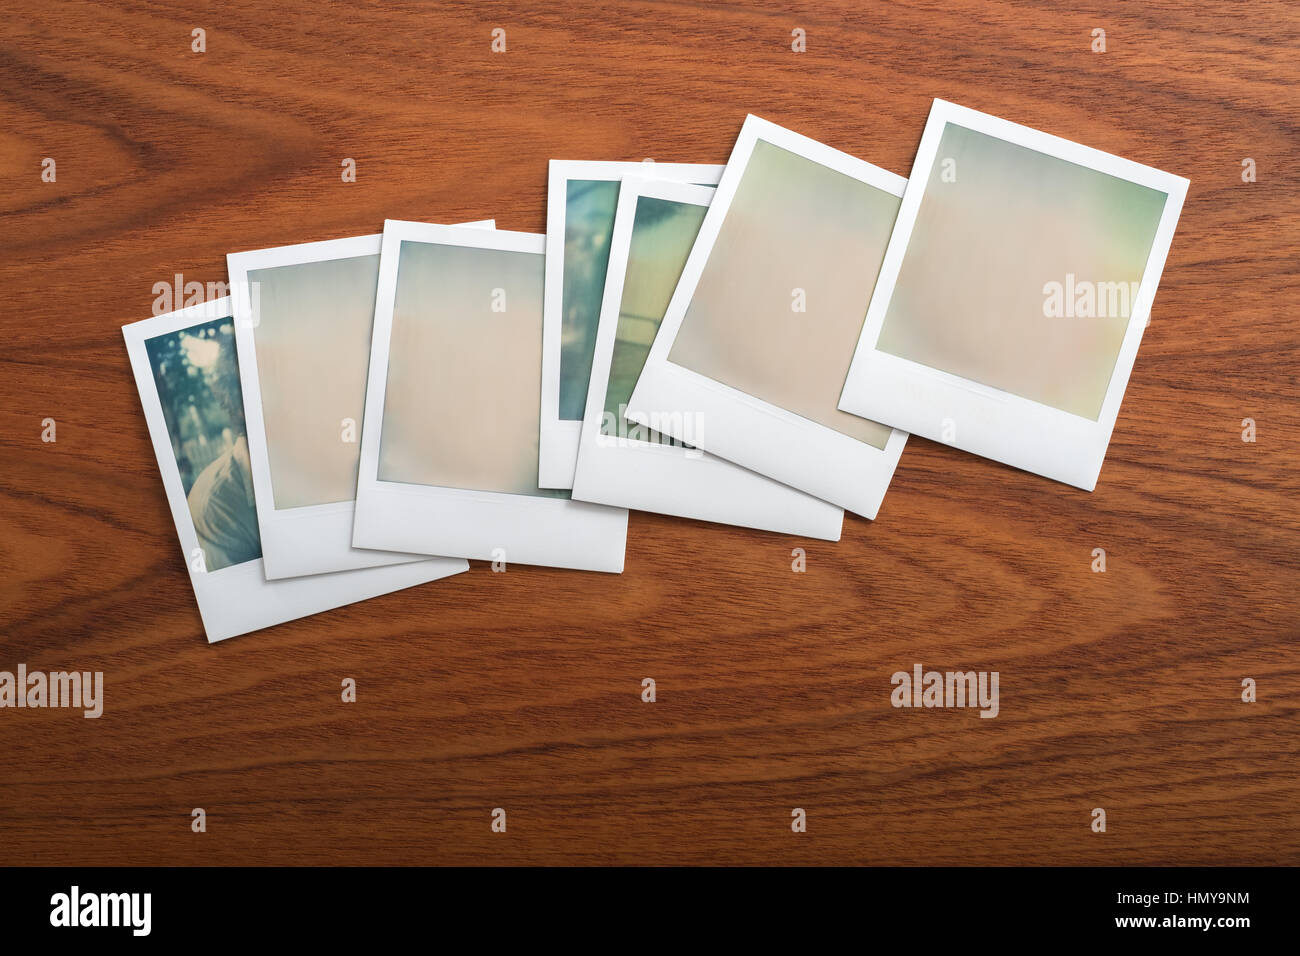 Blank instant print photographs on wooden table. Several Objects. Stock Photo